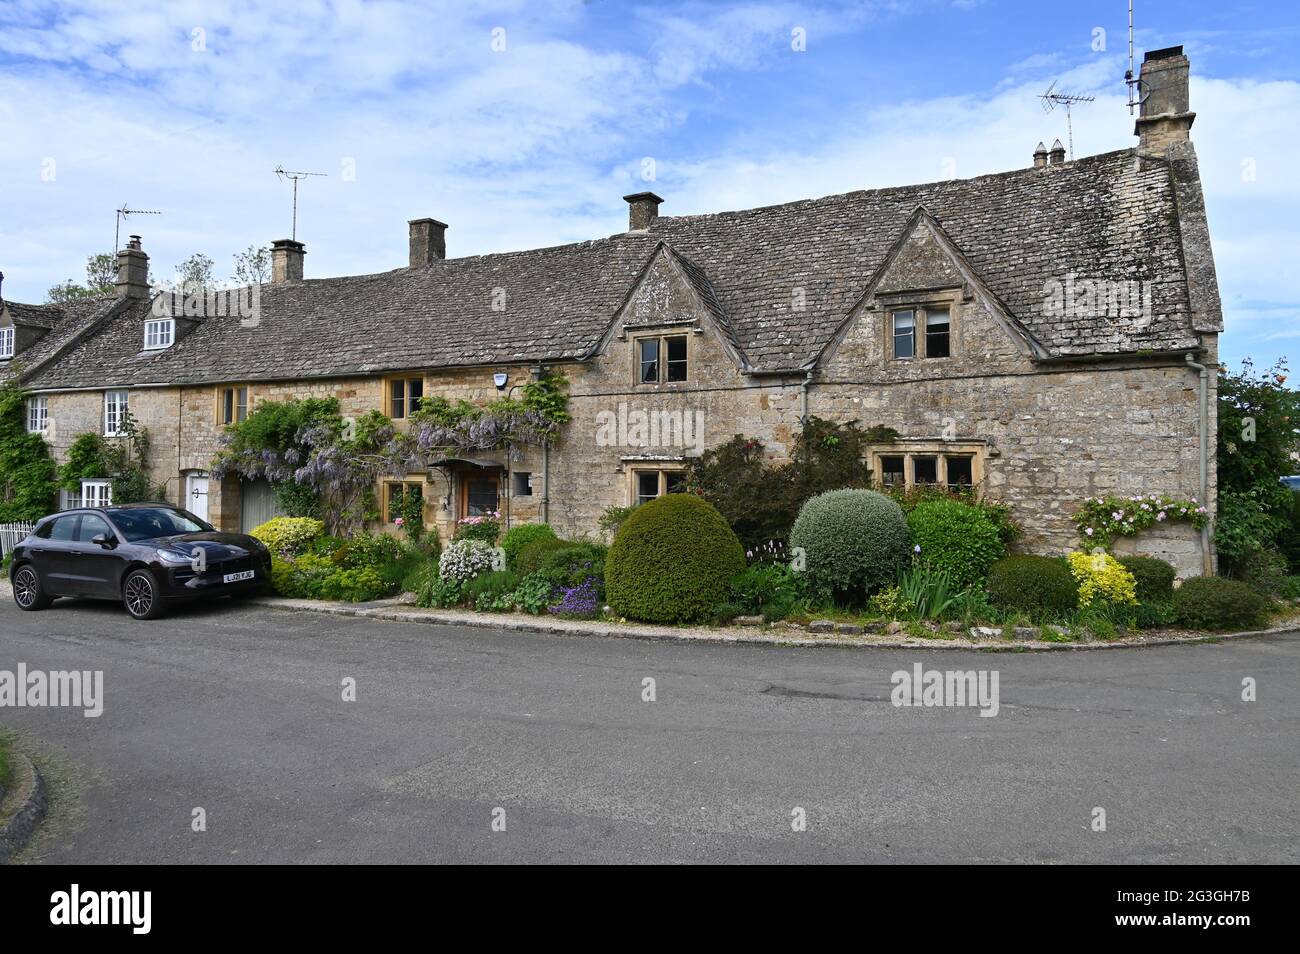 Wisteria in flower growing on the outside of a house in Bledington, Gloucestershire Stock Photo